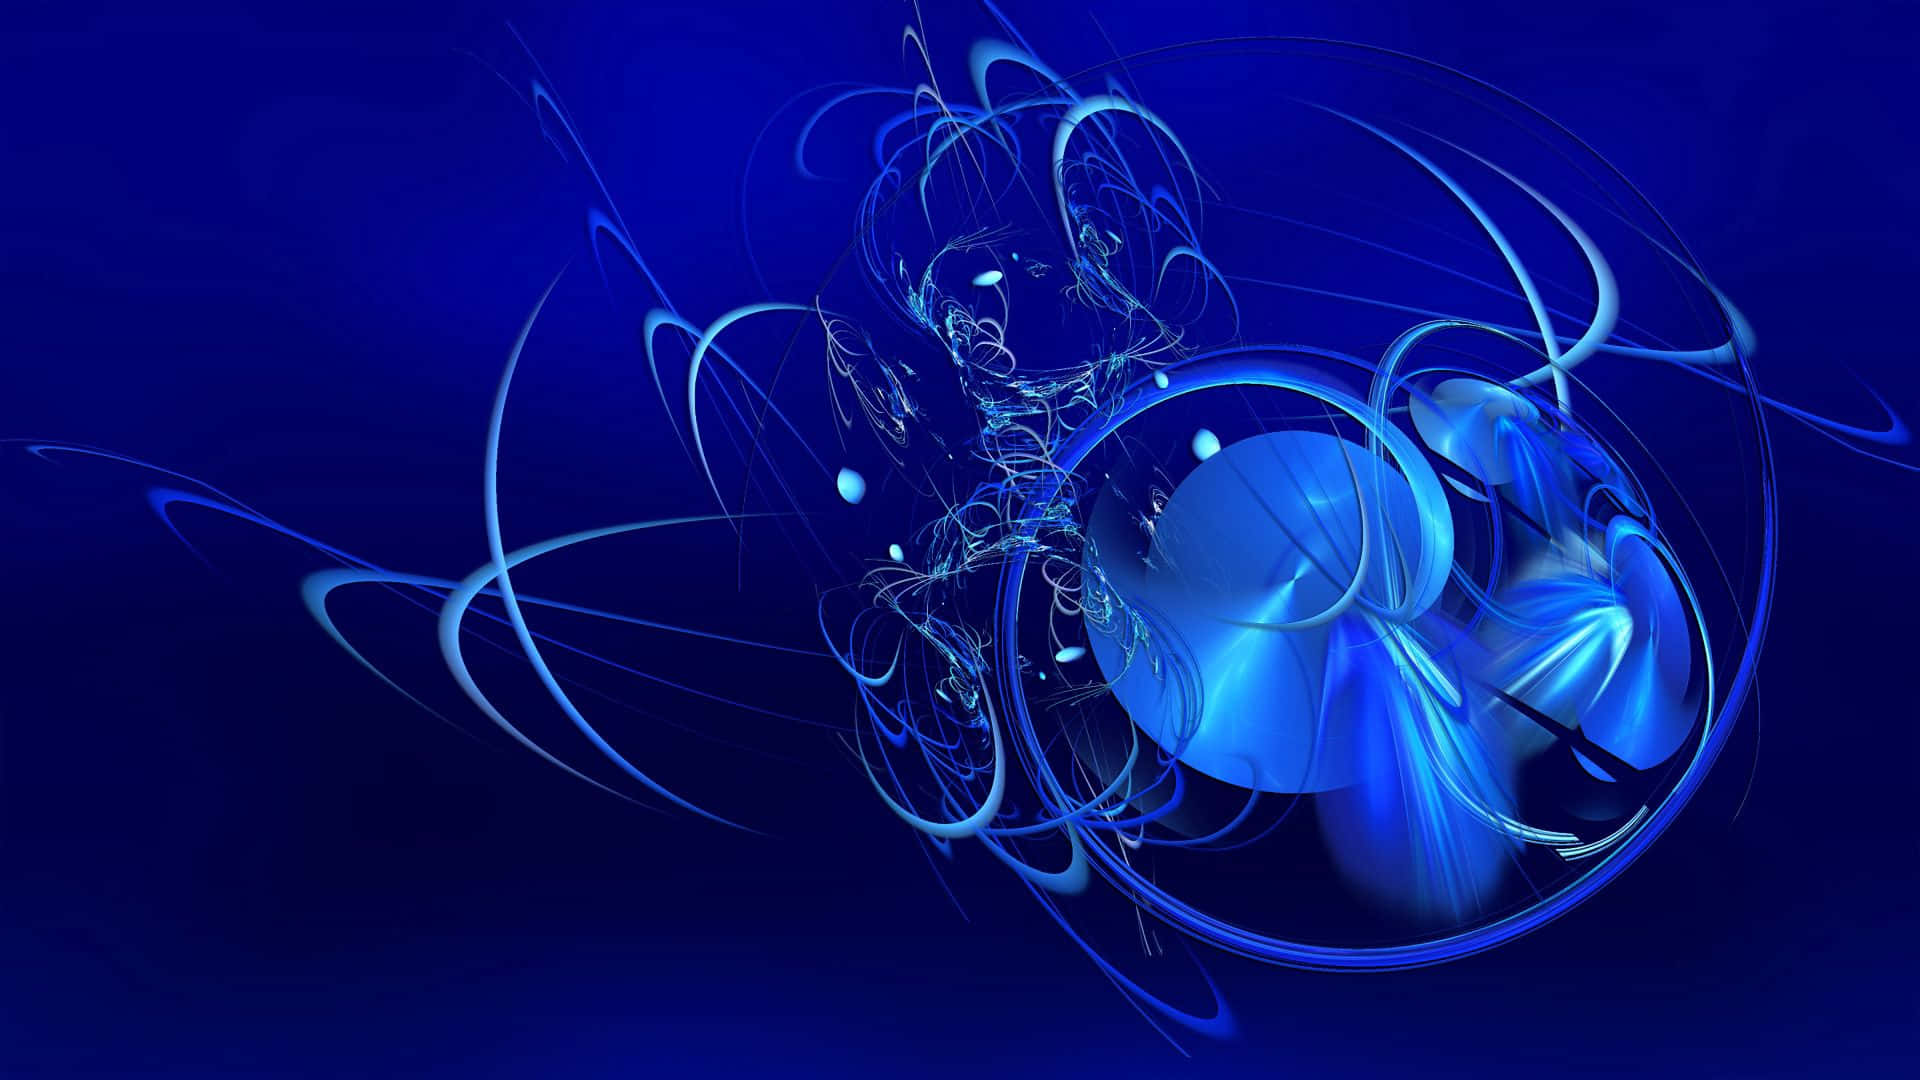 Abstract Patterns And Curves Blue Pc Wallpaper